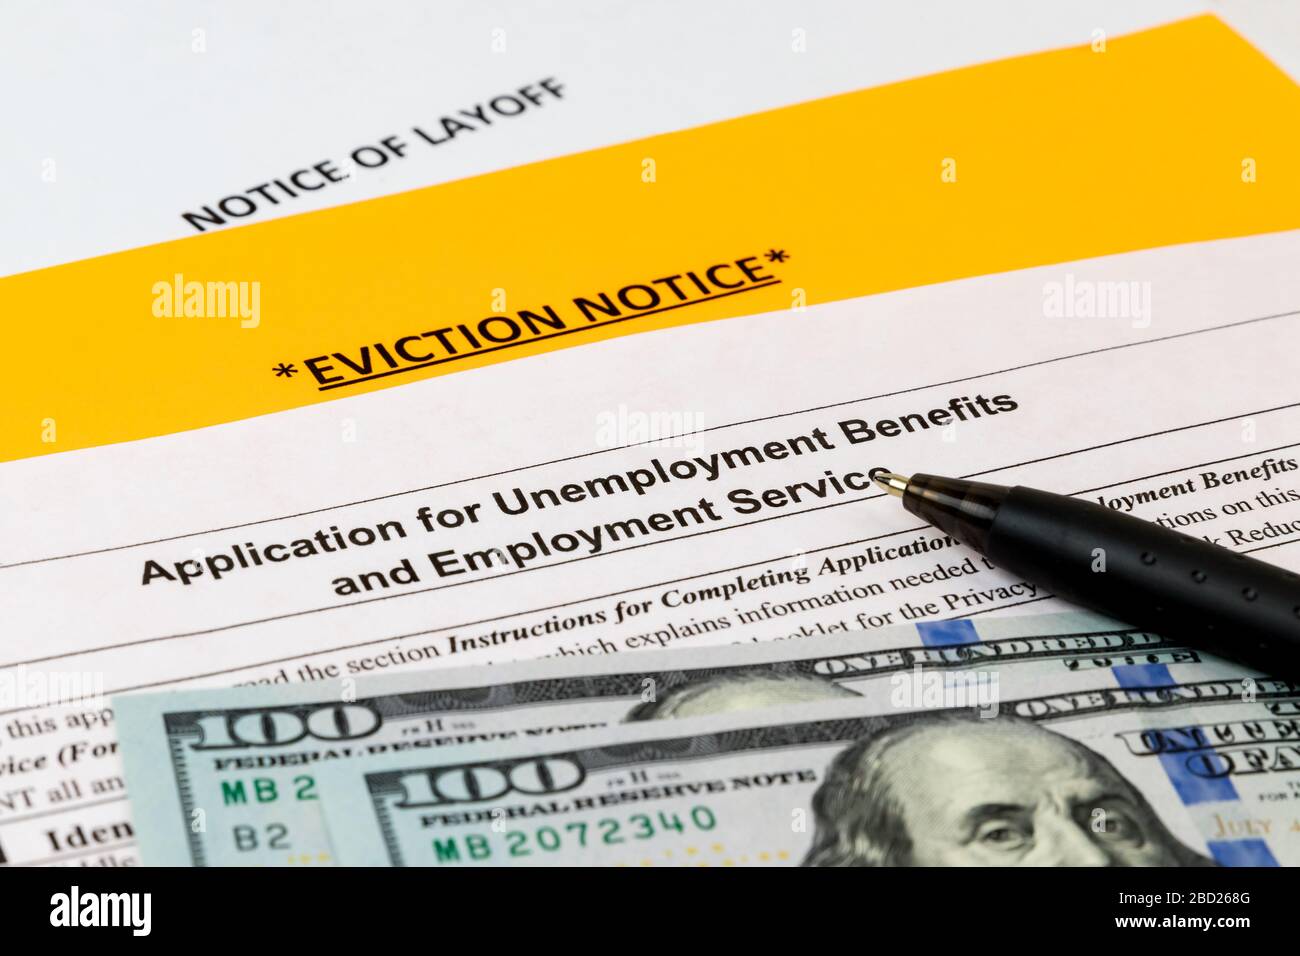 Job layoff notice, application for unemployment insurance benefits, eviction notice. Covid-19 coronavirus stay at home order effect on economy Stock Photo